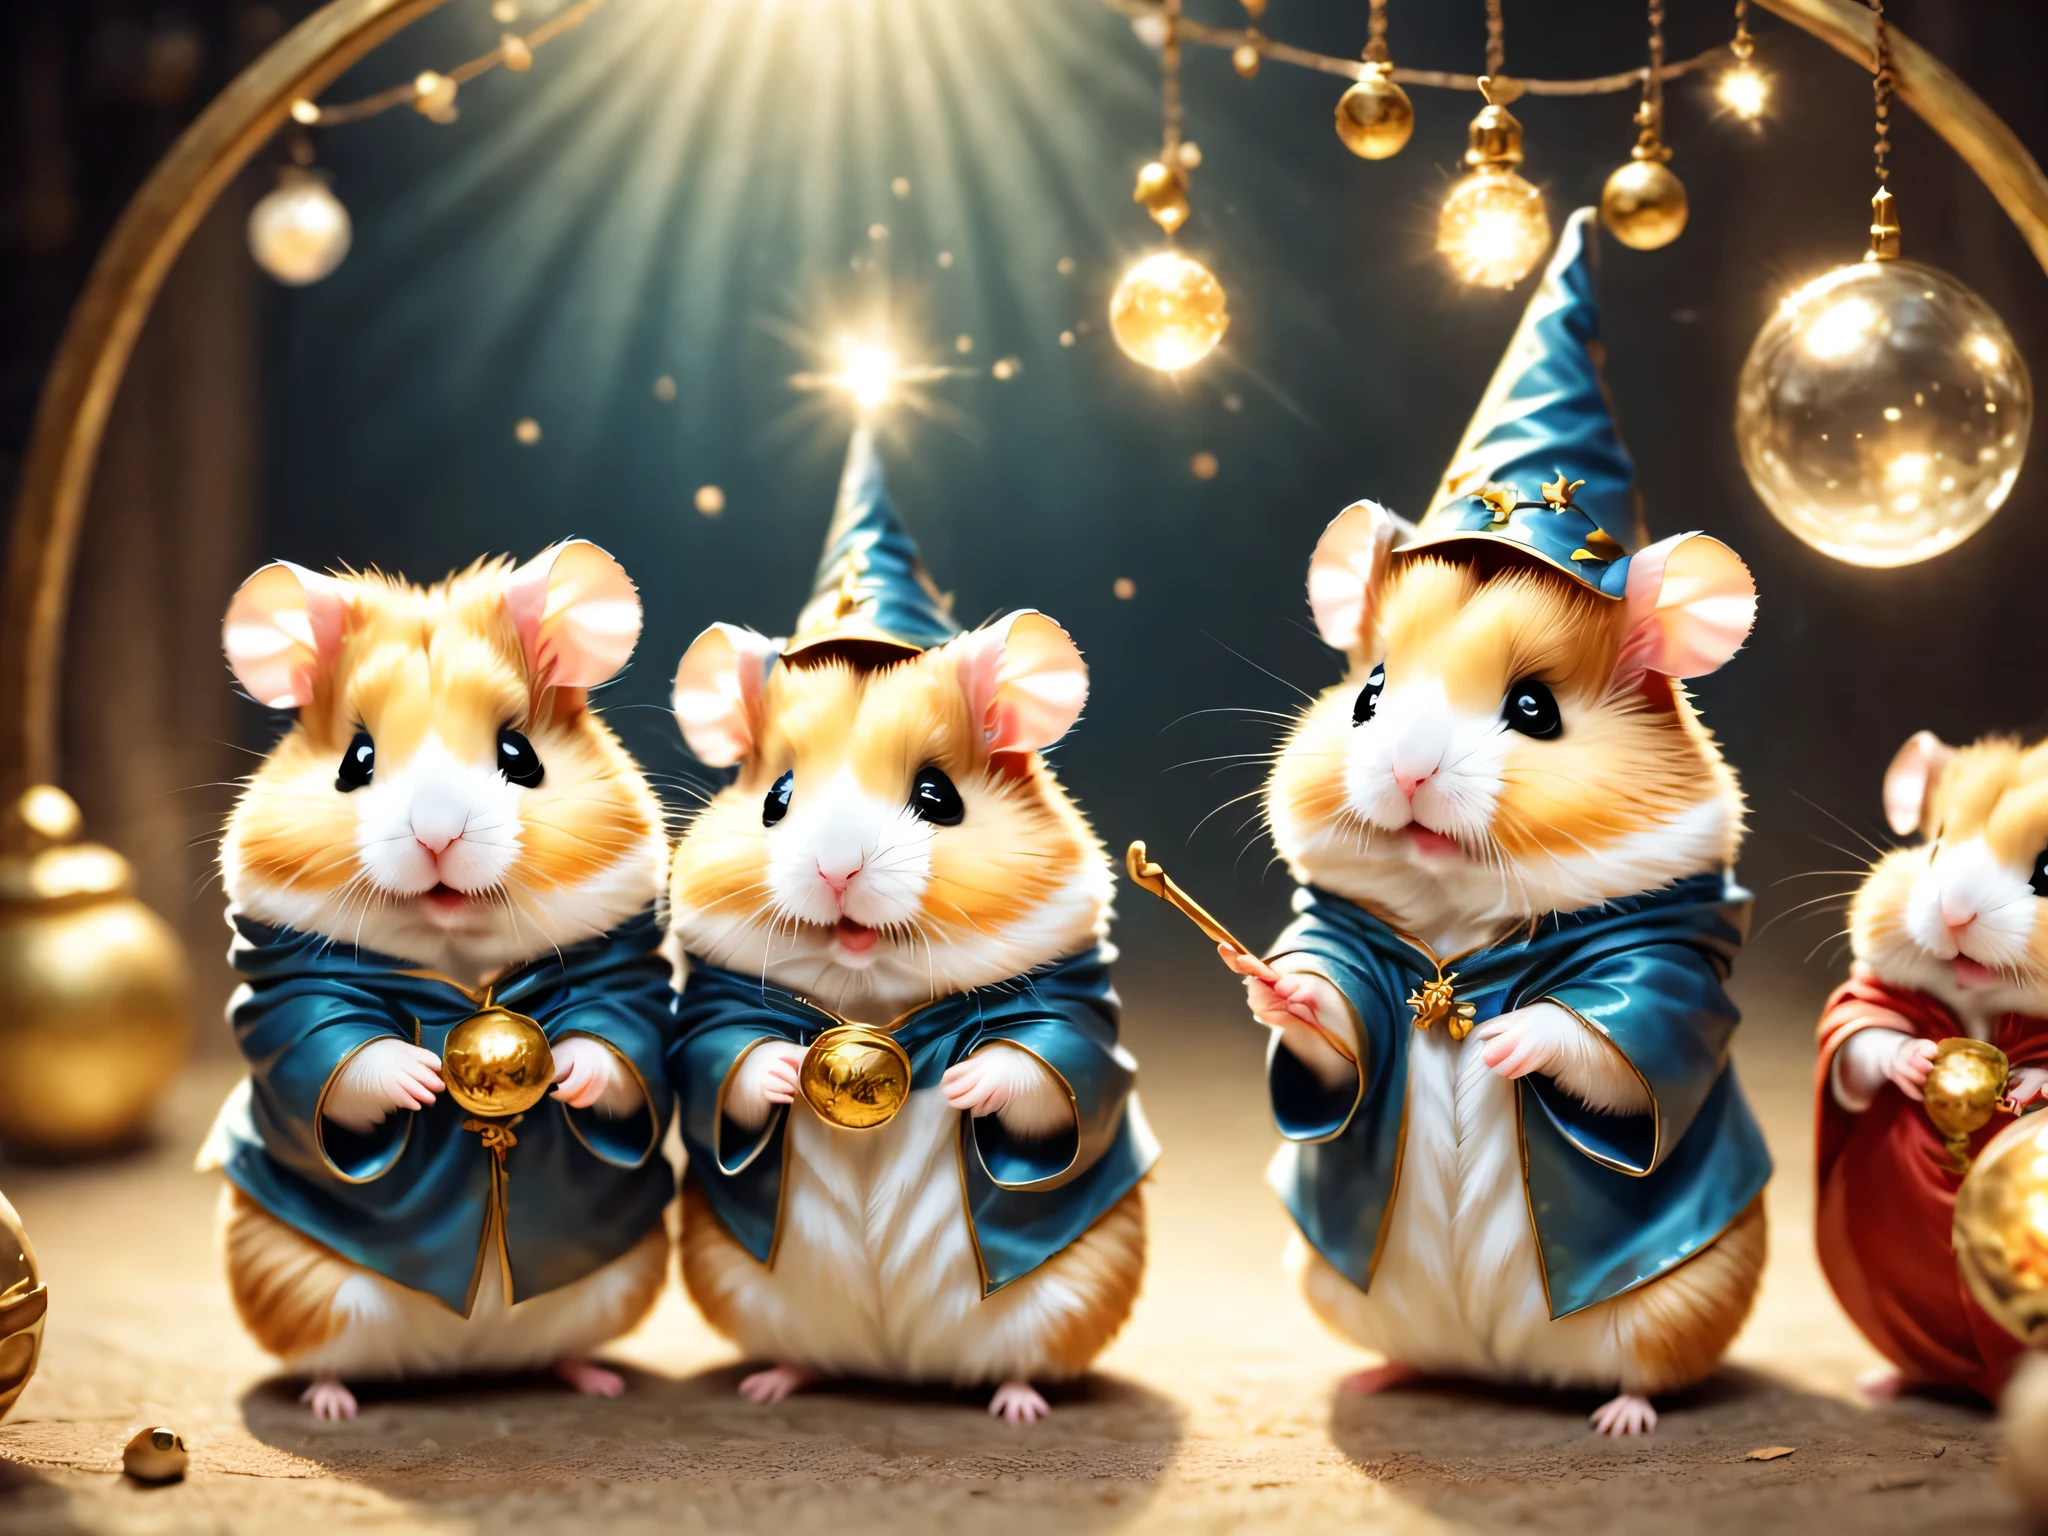 Sparkler,hamstania,festival,magic hamster party,((Hamster Wizard:great joy:raise your hand:open your mouth:jump:wizard&#39;s hat)),magic wand,,Wizard costume details:Colorful:draw a pattern with gold and silver,celebration,((空にはたくさんのSparklerがあがりました:Colorful)),,,castle balcony,lots of stars,about,Beautiful light effect,,masterpiece,highest quality,fluffy hamster,Chibi,cute,fun,happiness,,magic light,,Fantastic,Colorfulな空の詳細,anatomically correct,all the best,,Little hamster,最高にcuteハムスター，fantasy,randolph caldecott style,enlightenment,watercolor painting,